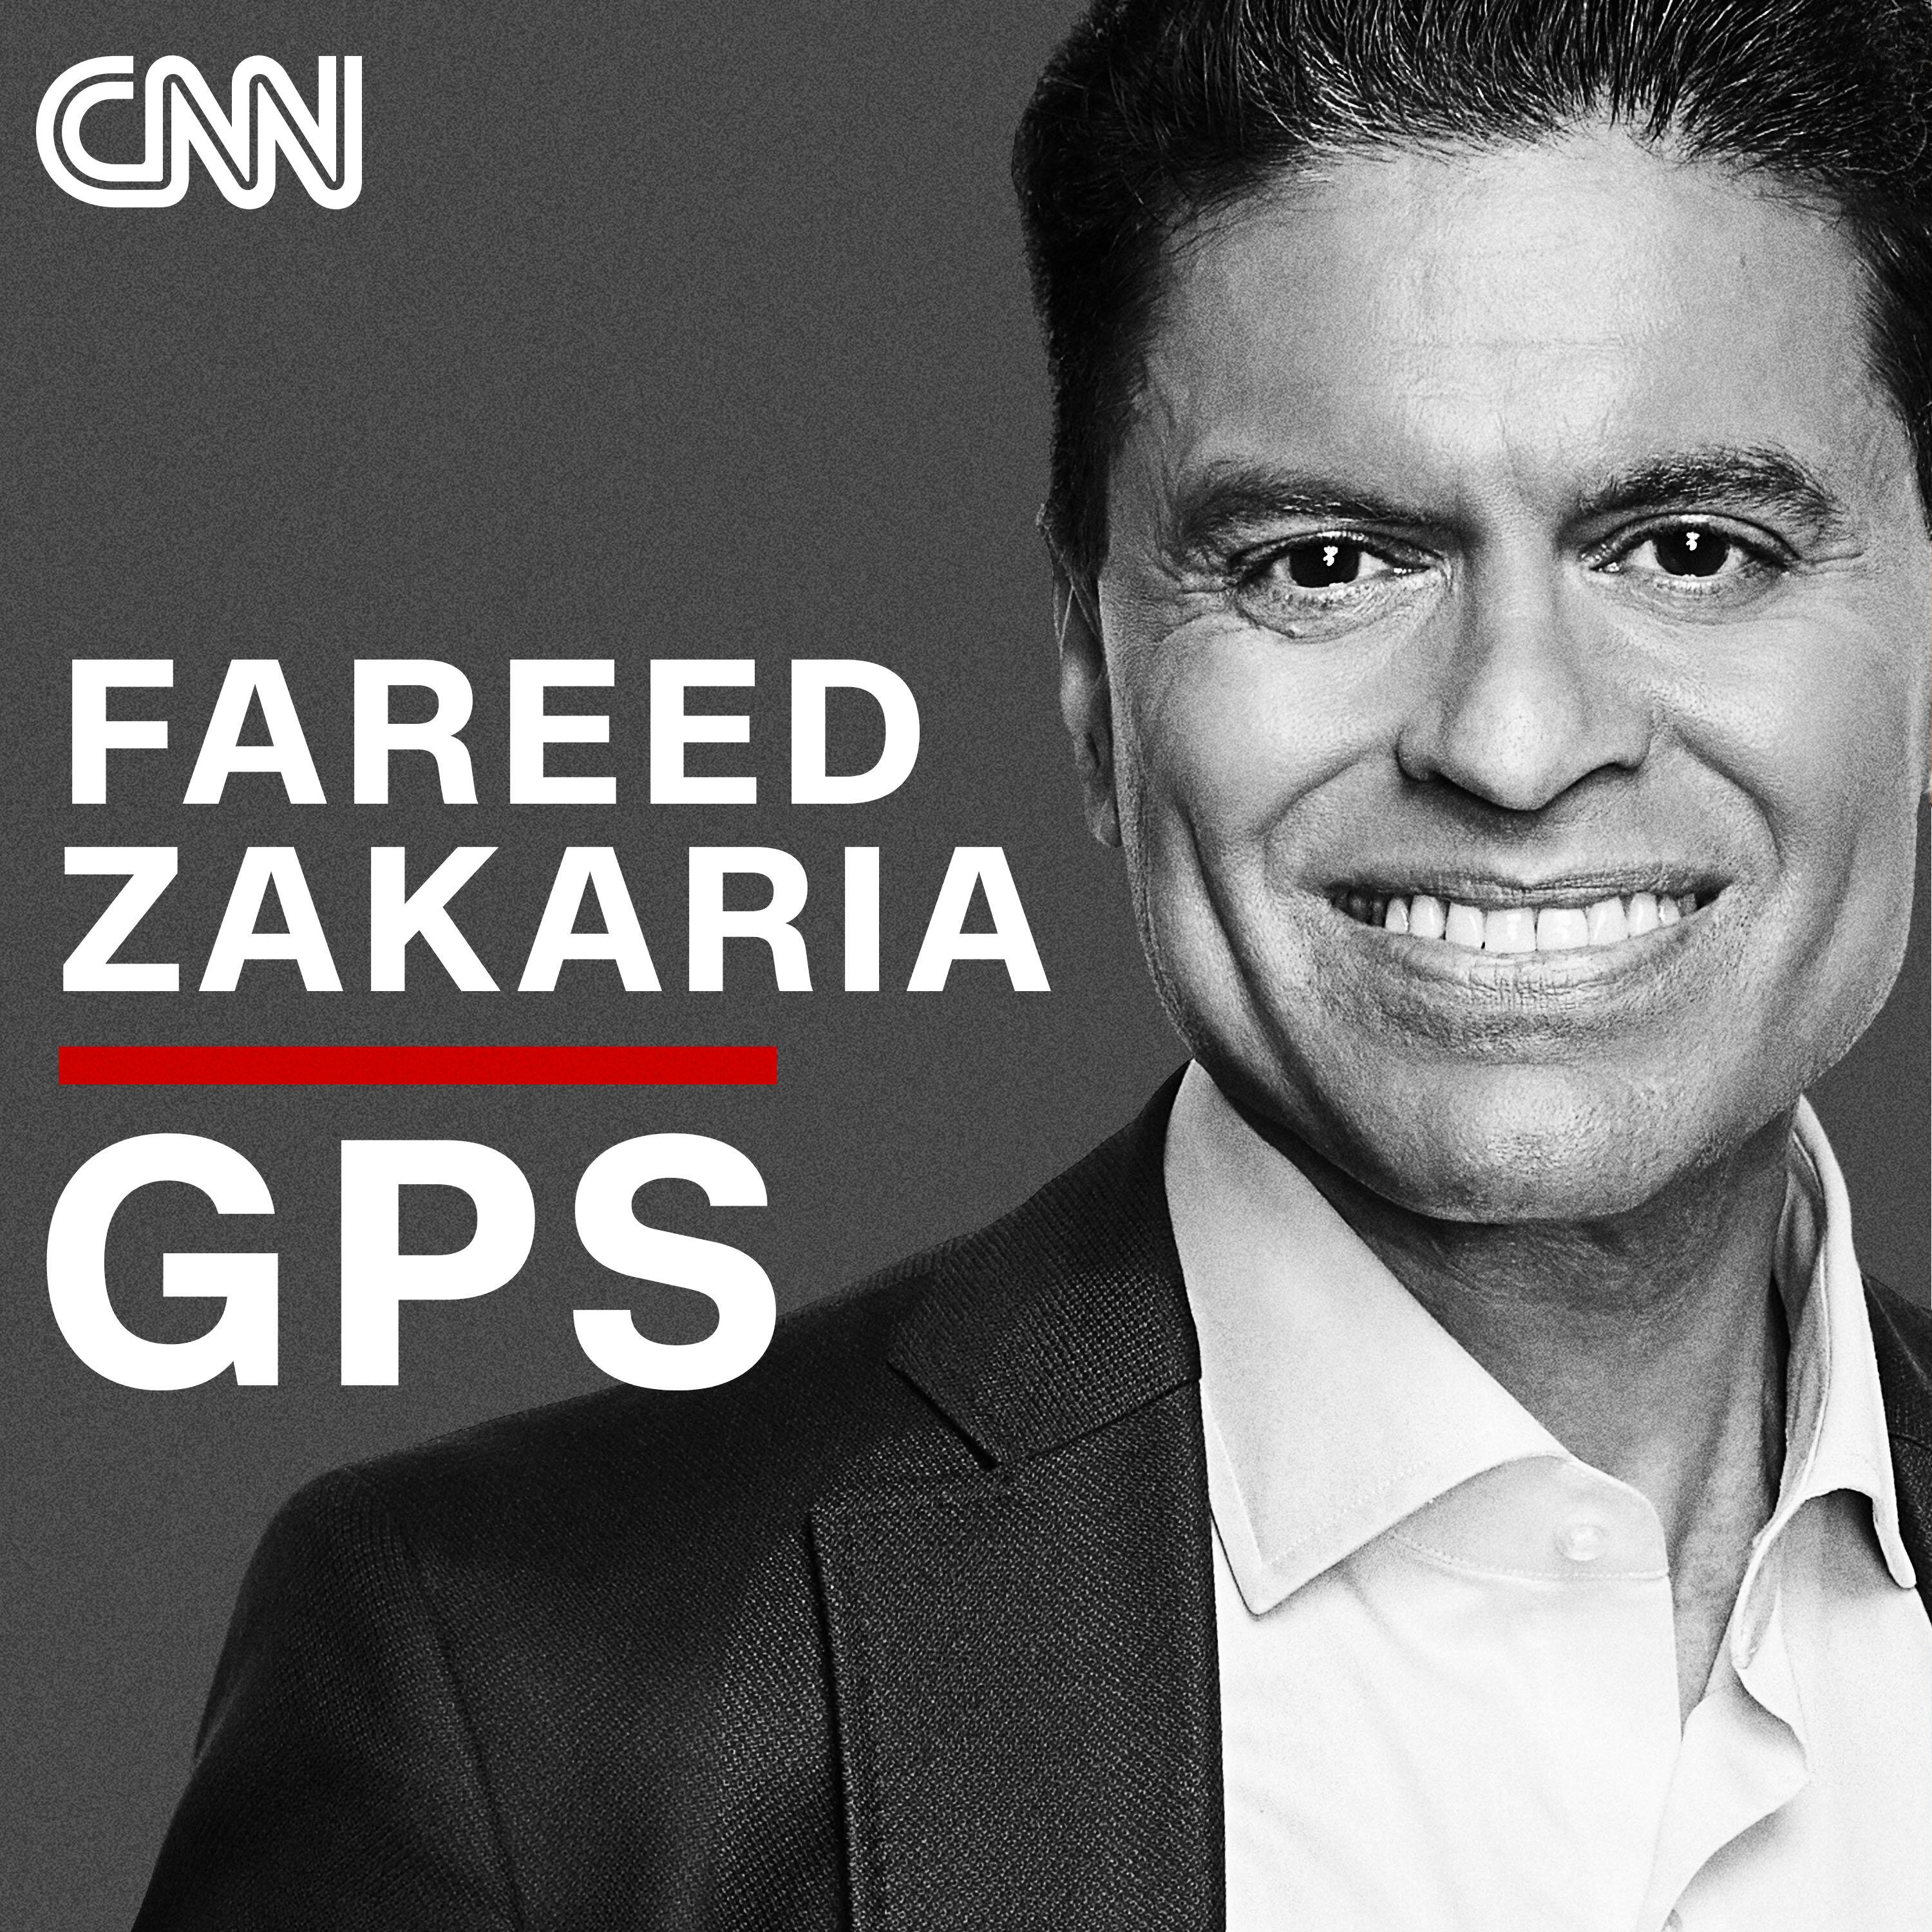 May 10, 2020 | The Post Covid-19 World - A Fareed Zakaria GPS Special with Tony Blair, Larry Summers, Eric Schmidt, Arianna Huffington, James Fallows and more!